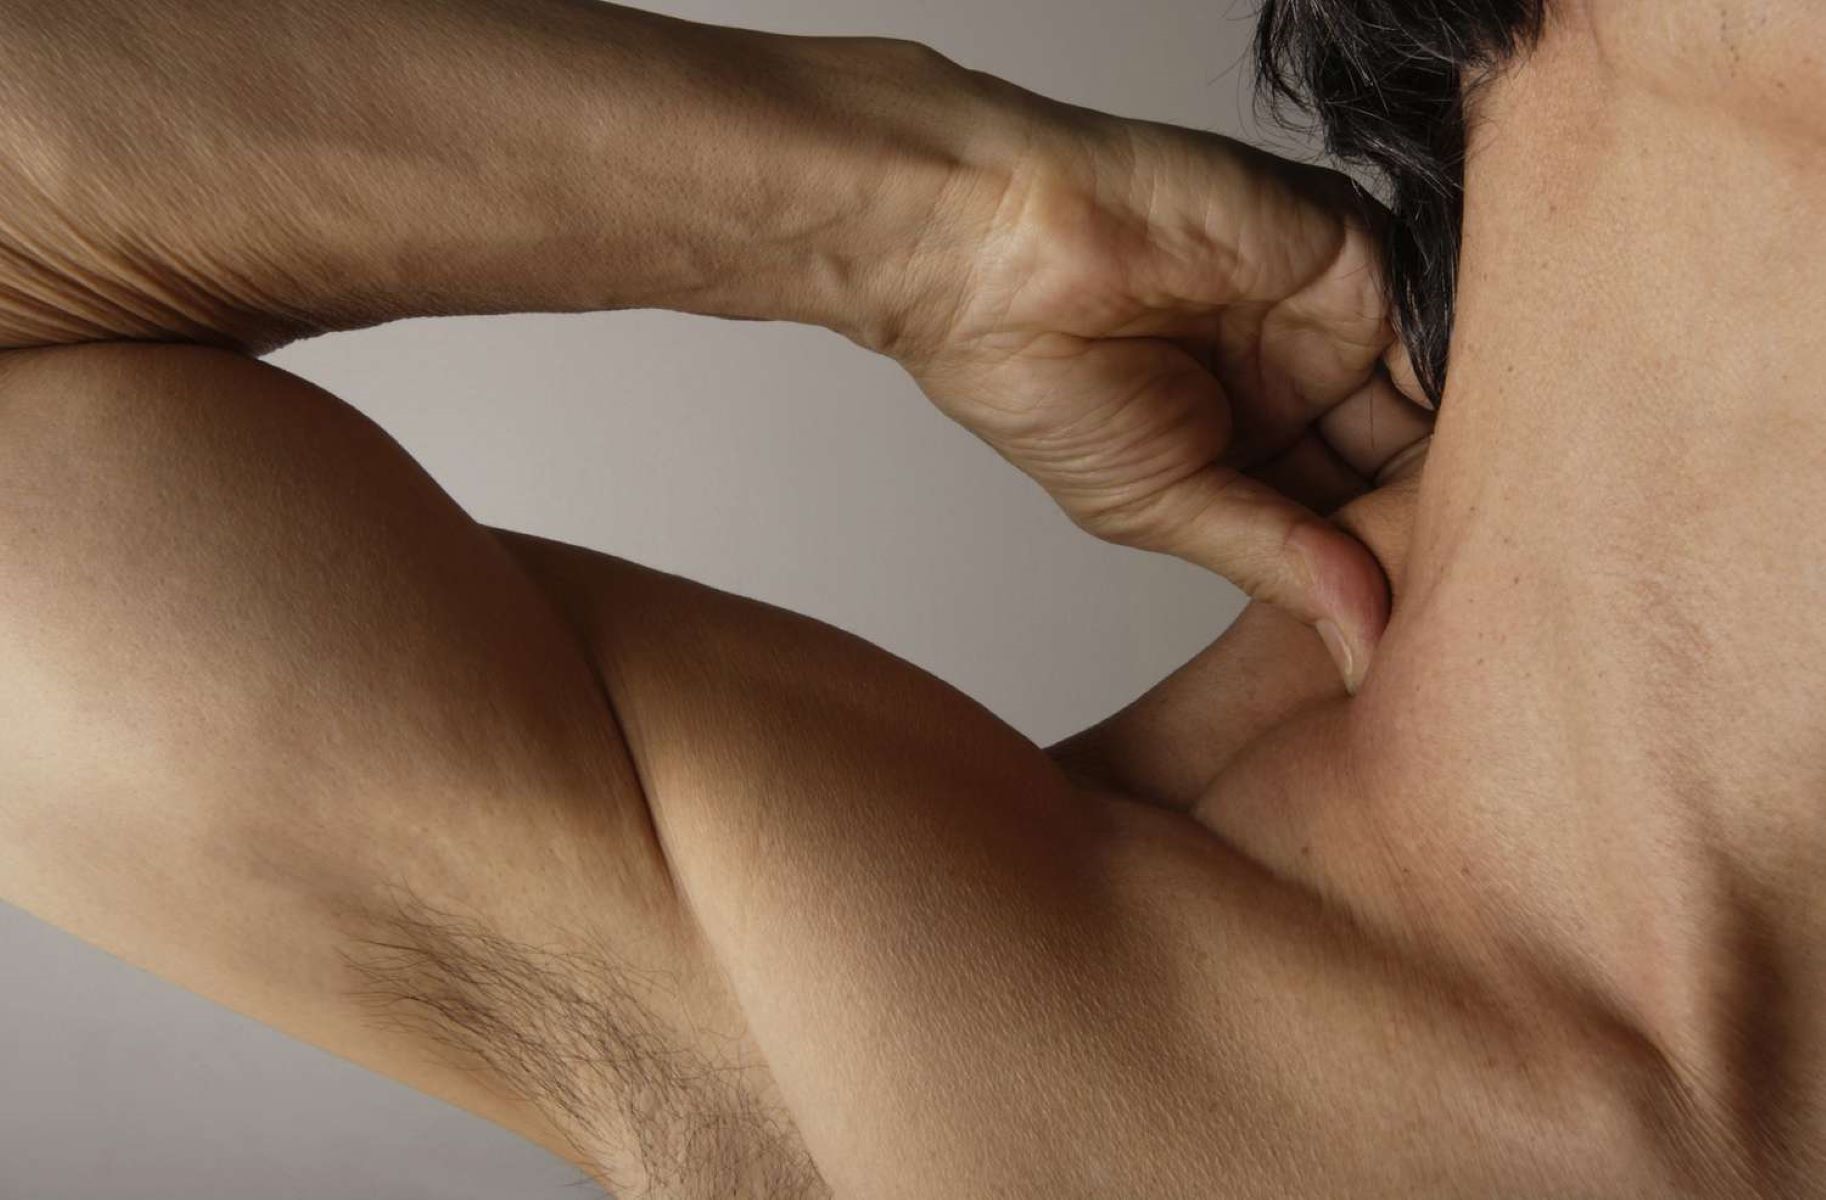 How To Figure Out Your Neck Size Without Measuring Tape